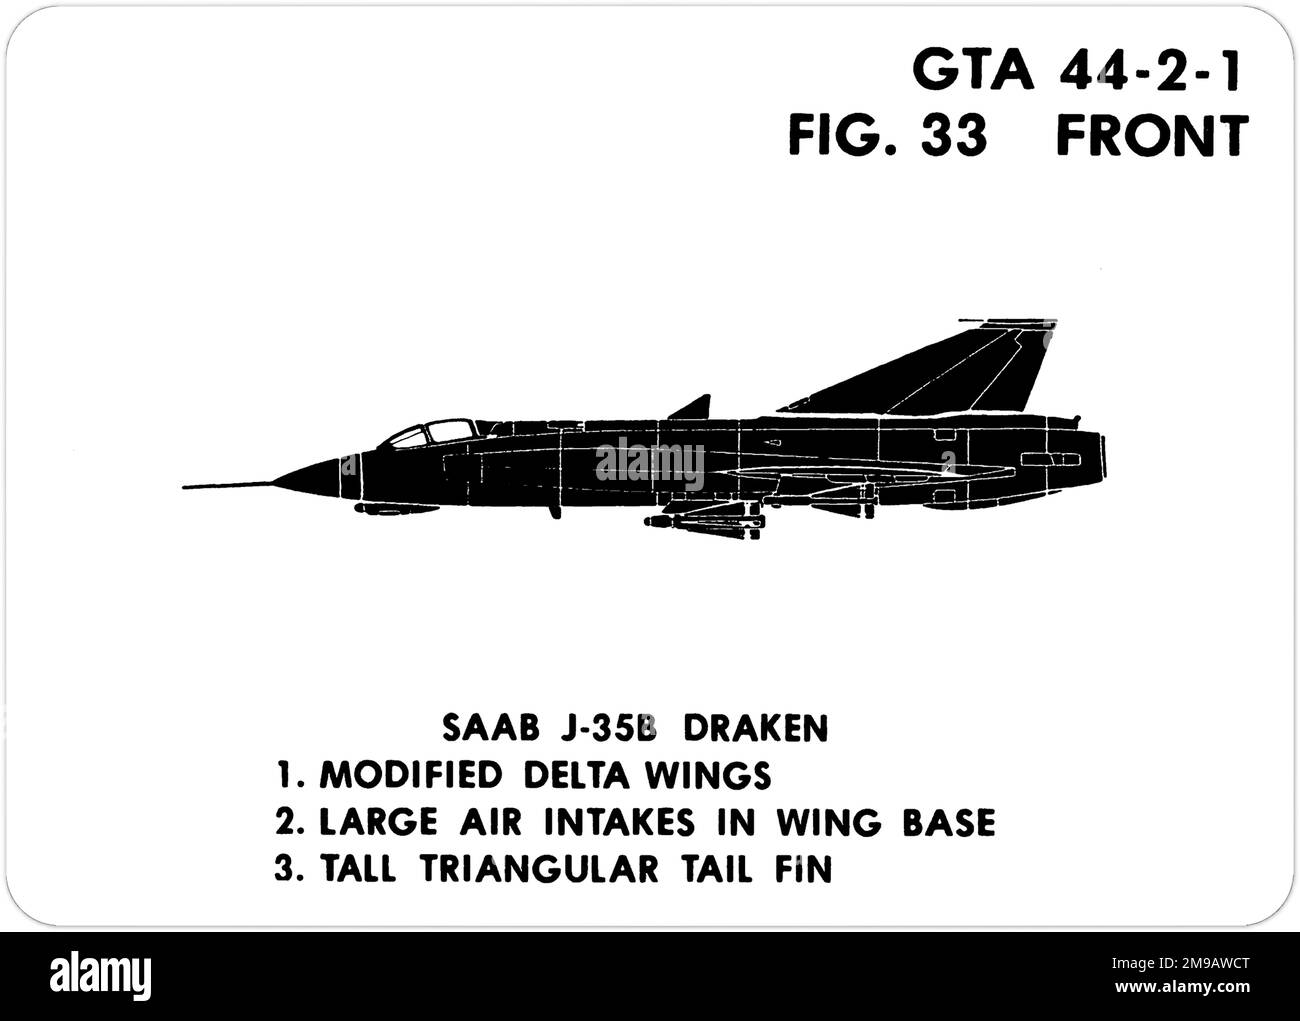 SAAB J35B Draken. This is one of the series of Graphics Training Aids (GTA) used by the United States Army to train their personnel to recognize friendly and hostile aircraft. This particular set, GTA 44-2-1, was issued in July1977. The set features aircraft from: Canada, Italy, United Kingdom, United States, and the USSR. Stock Photo